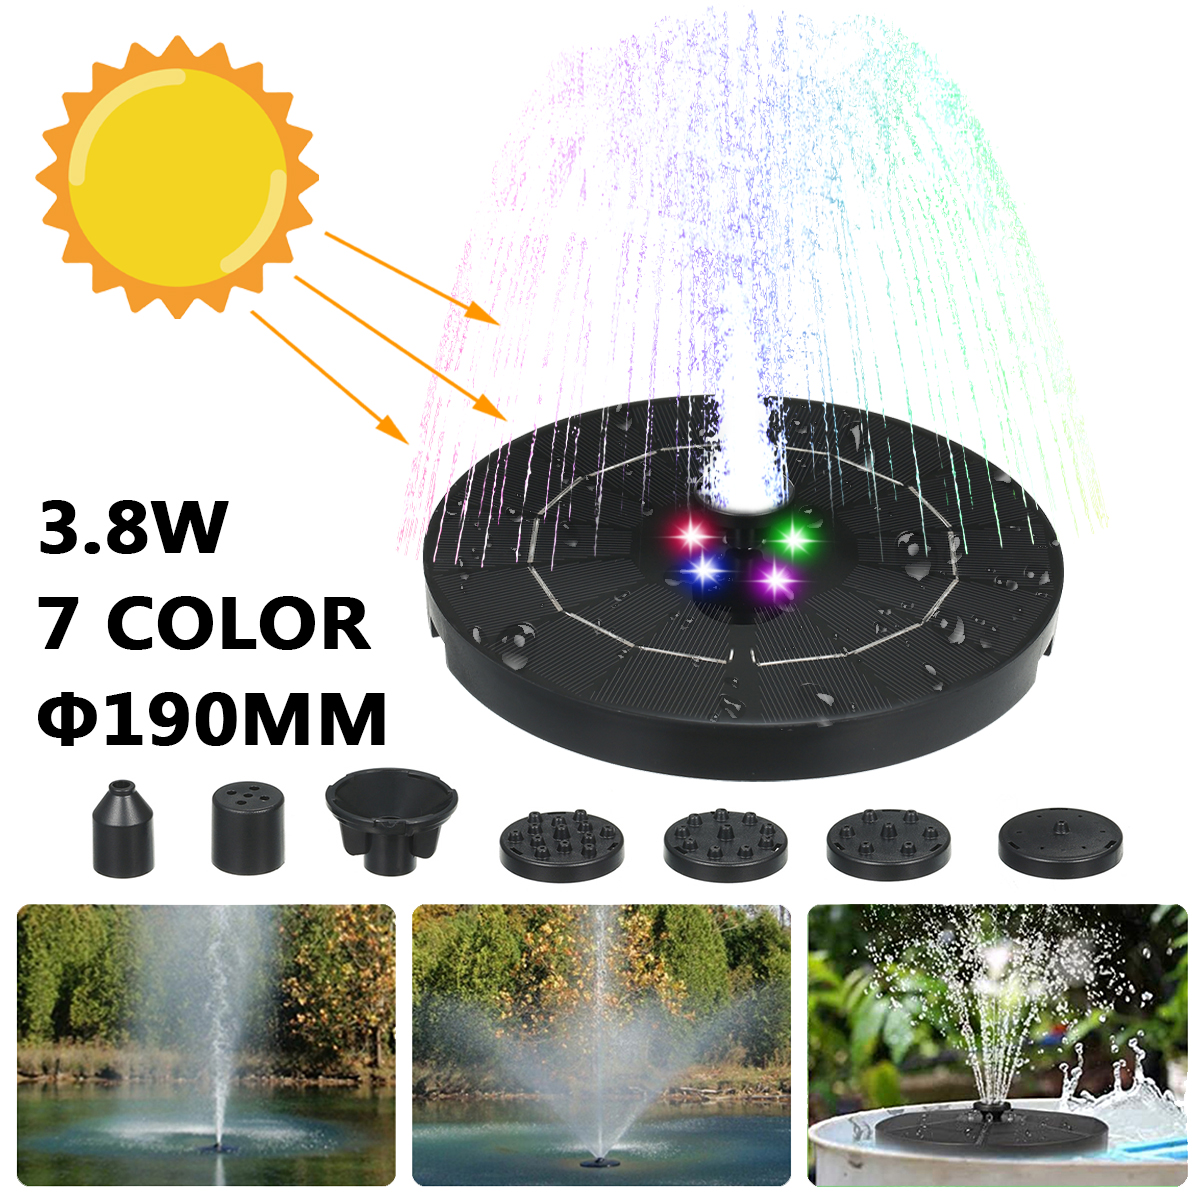 RGB-LED-Solar-Powered-Fountain-Pump-W-6-Nozzles-Water-Pump-Night-Floating-Garden-1879317-4